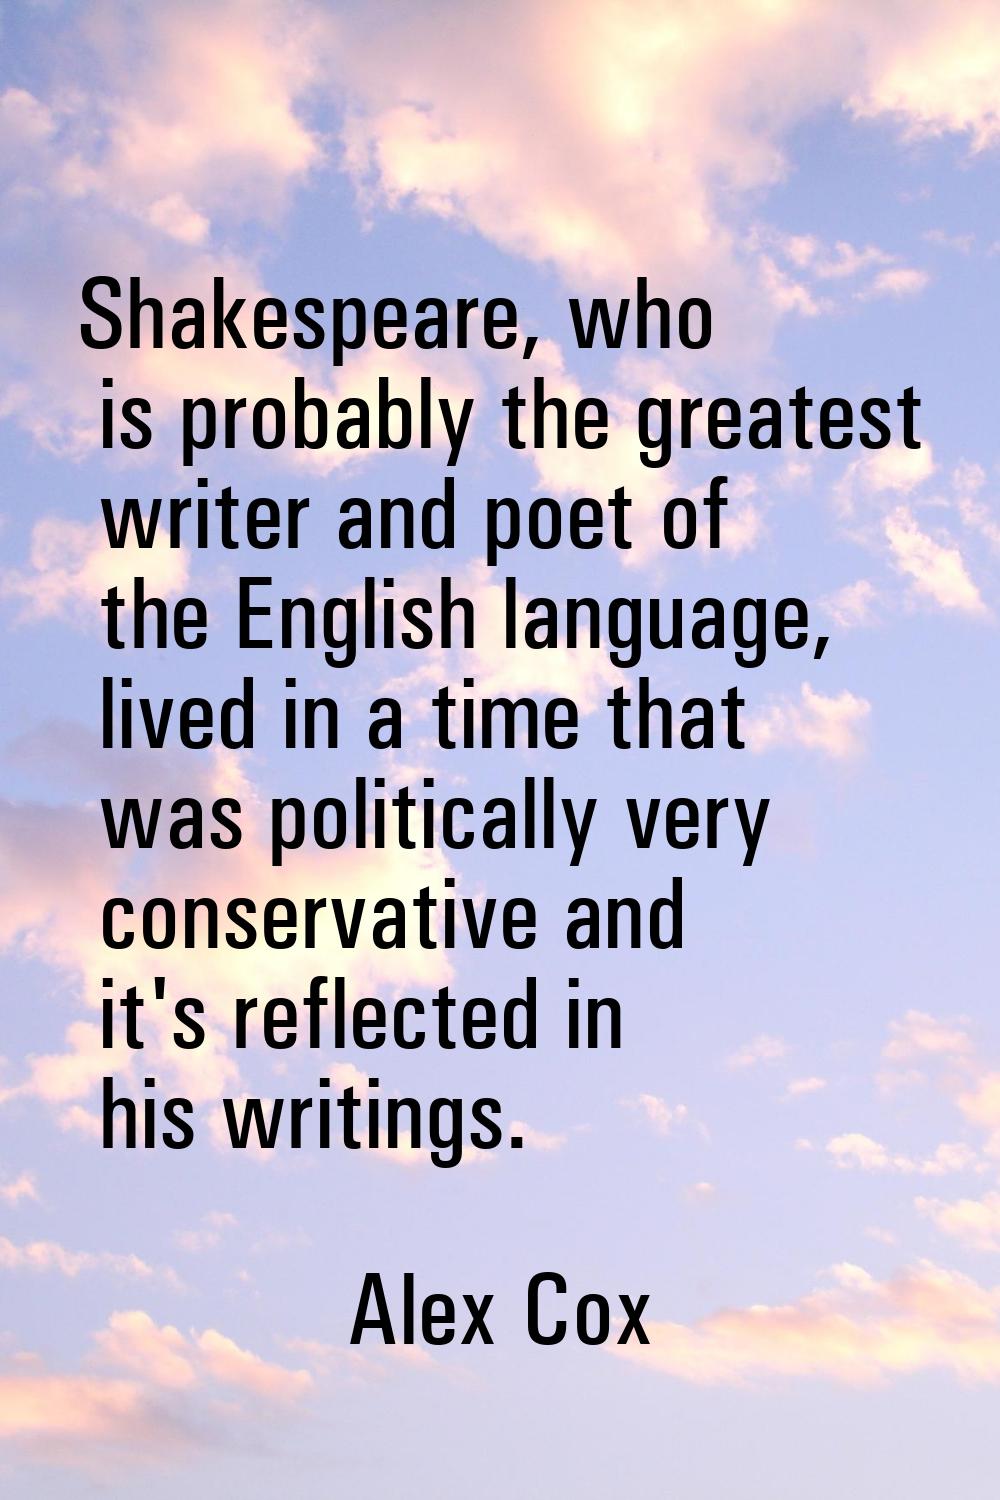 Shakespeare, who is probably the greatest writer and poet of the English language, lived in a time 